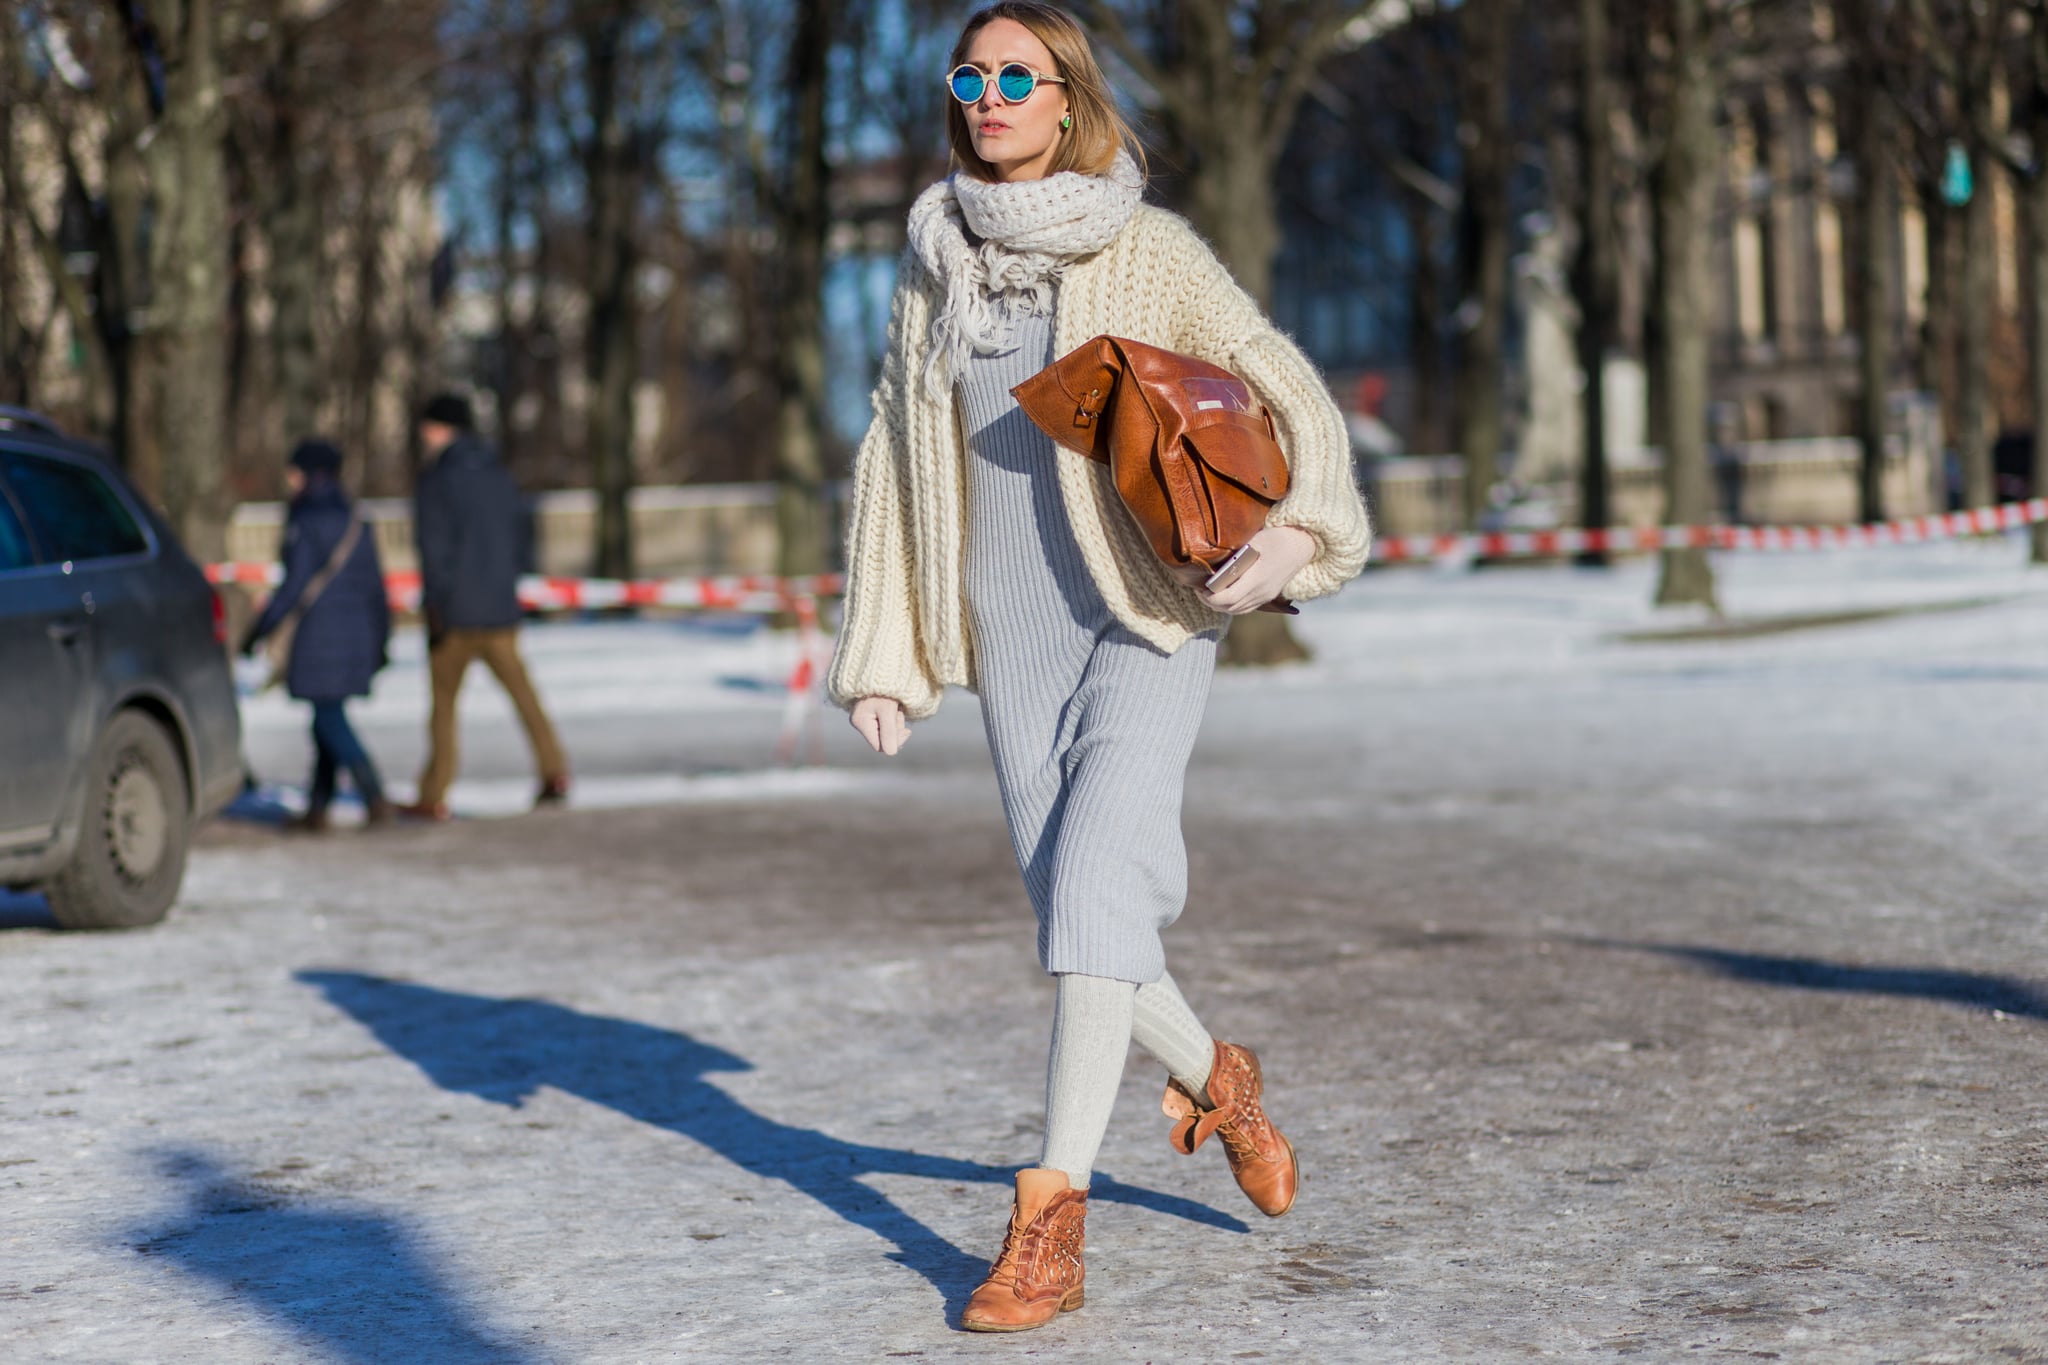 Getting playful with your Winter dress code is as easy as adding